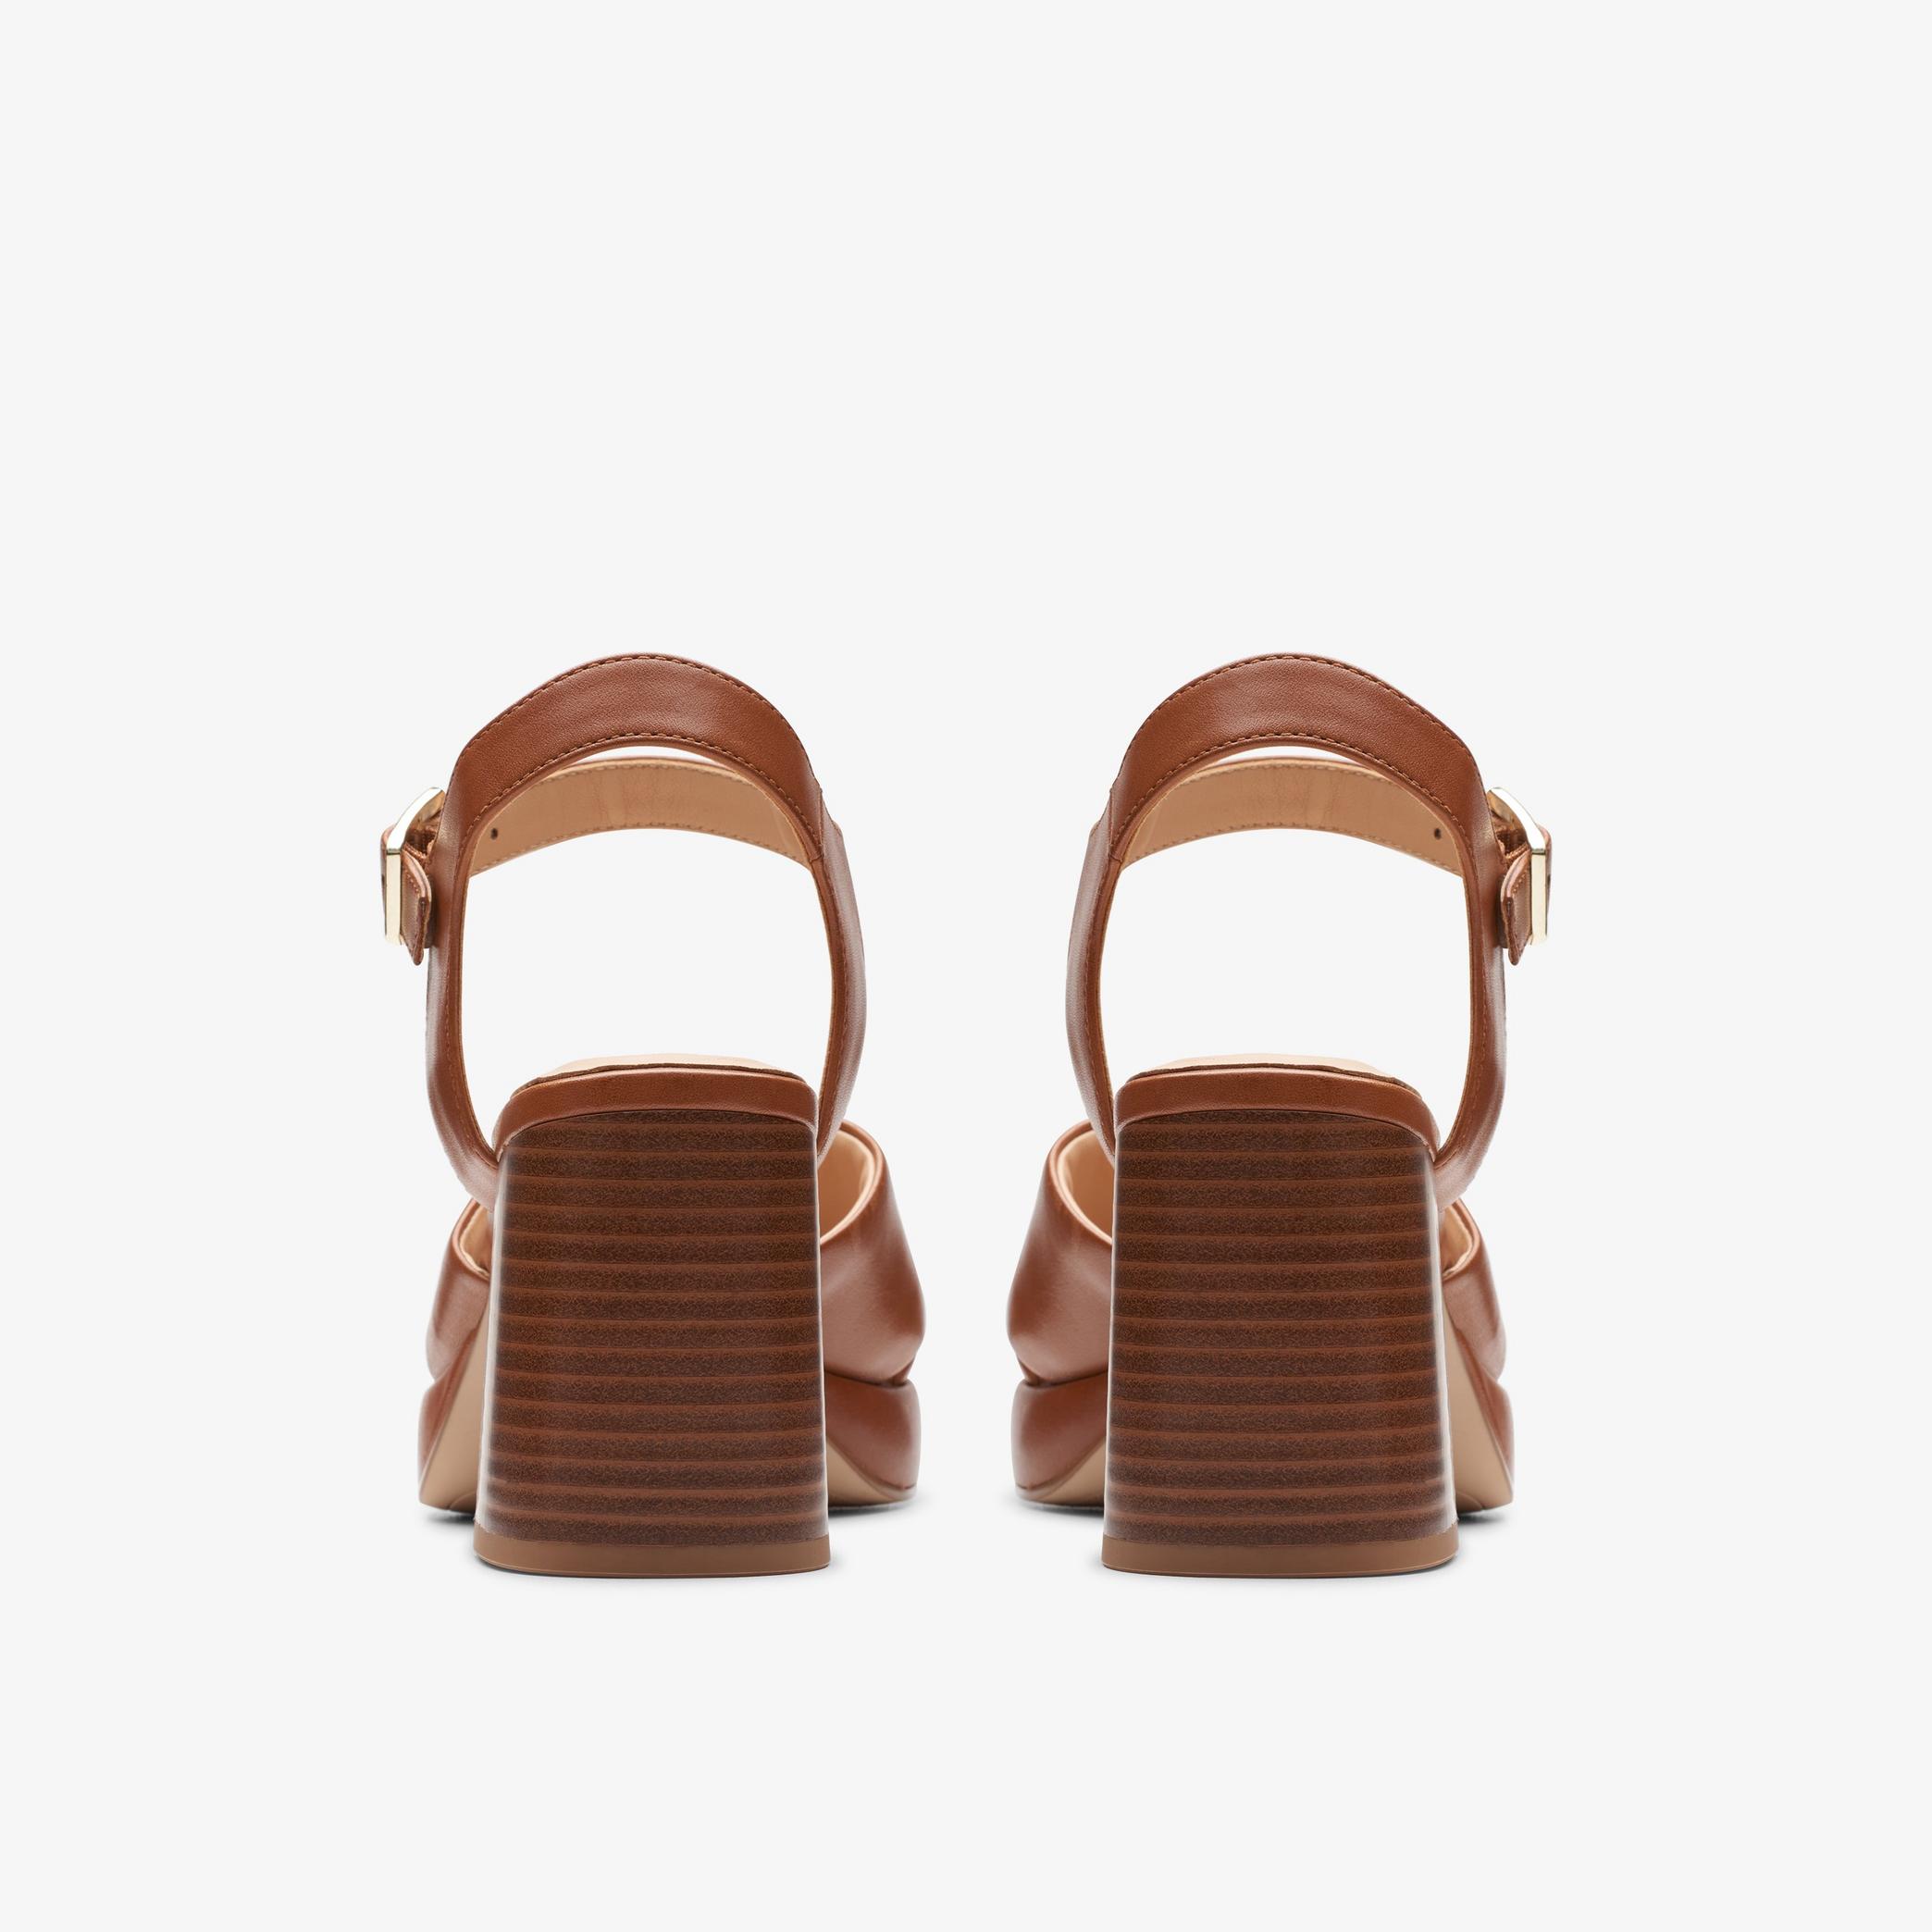 Ritzy 75 Rae Tan Leather Heeled Sandals, view 10 of 11